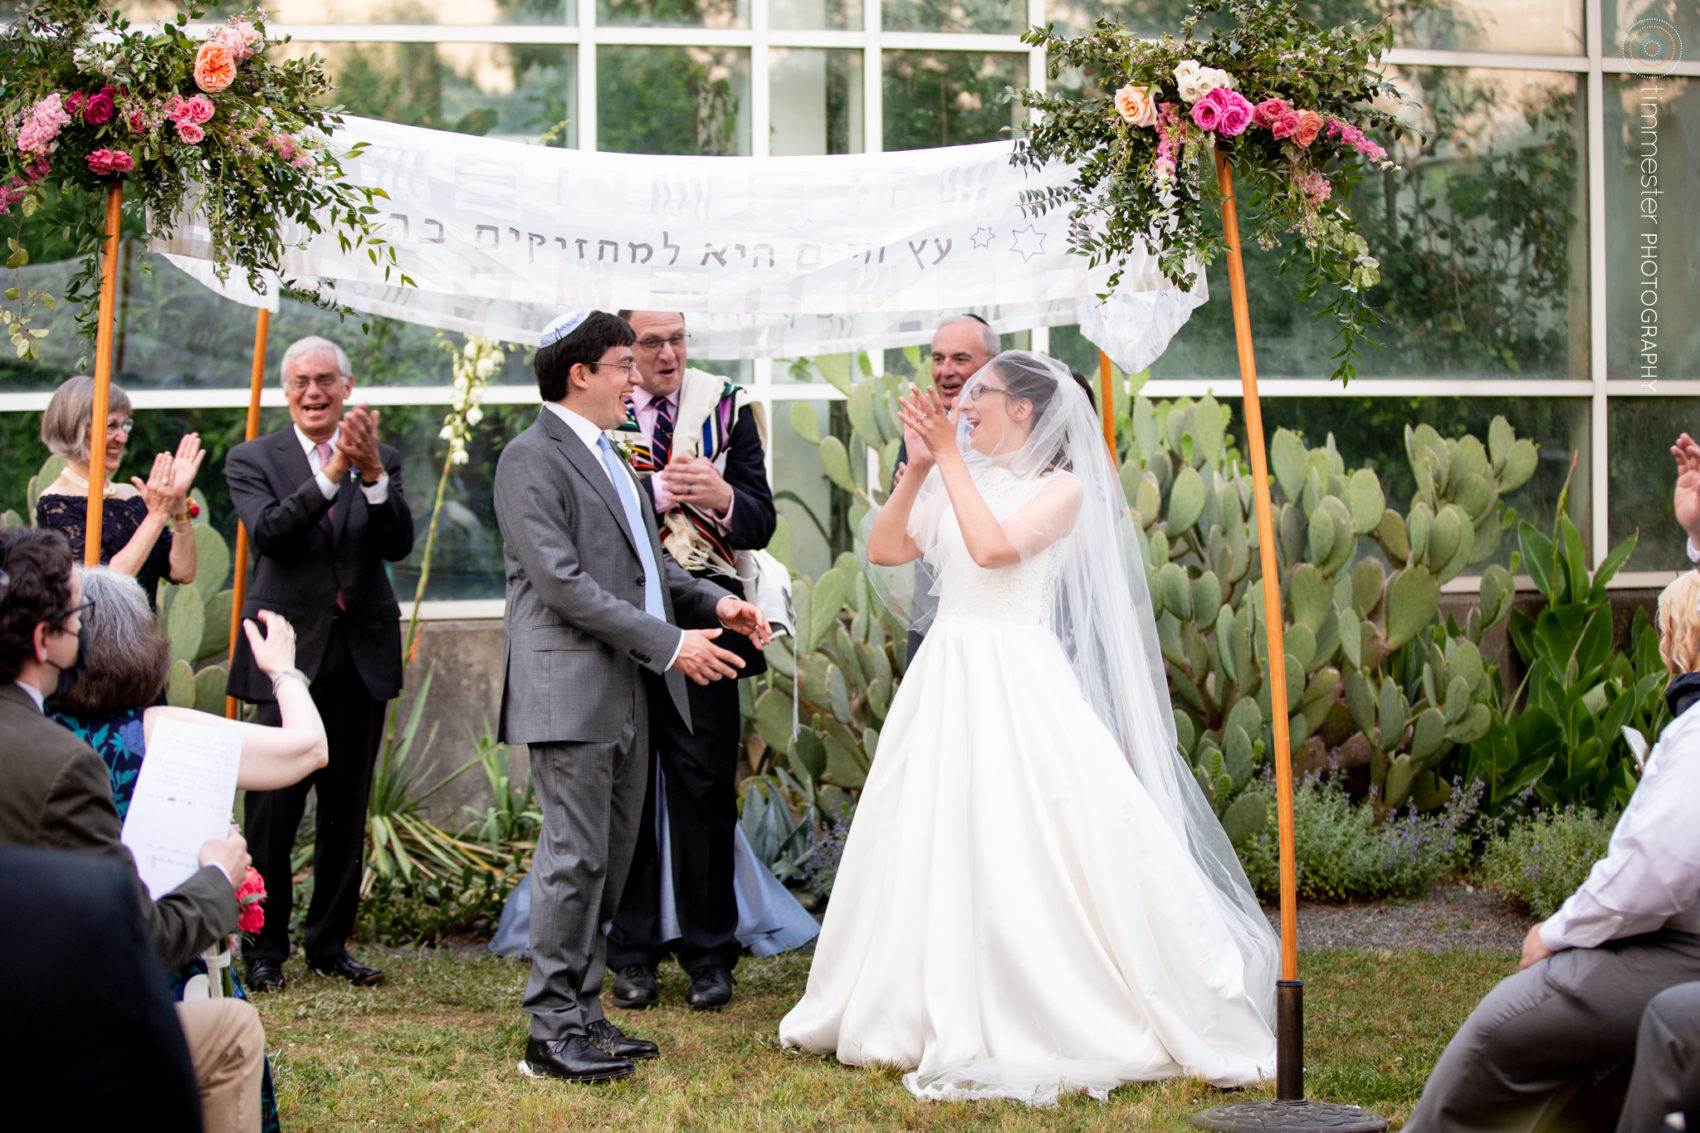 A Jewish wedding ceremony outside the butterfly conservatory at the Museum of Life and Science in Durham